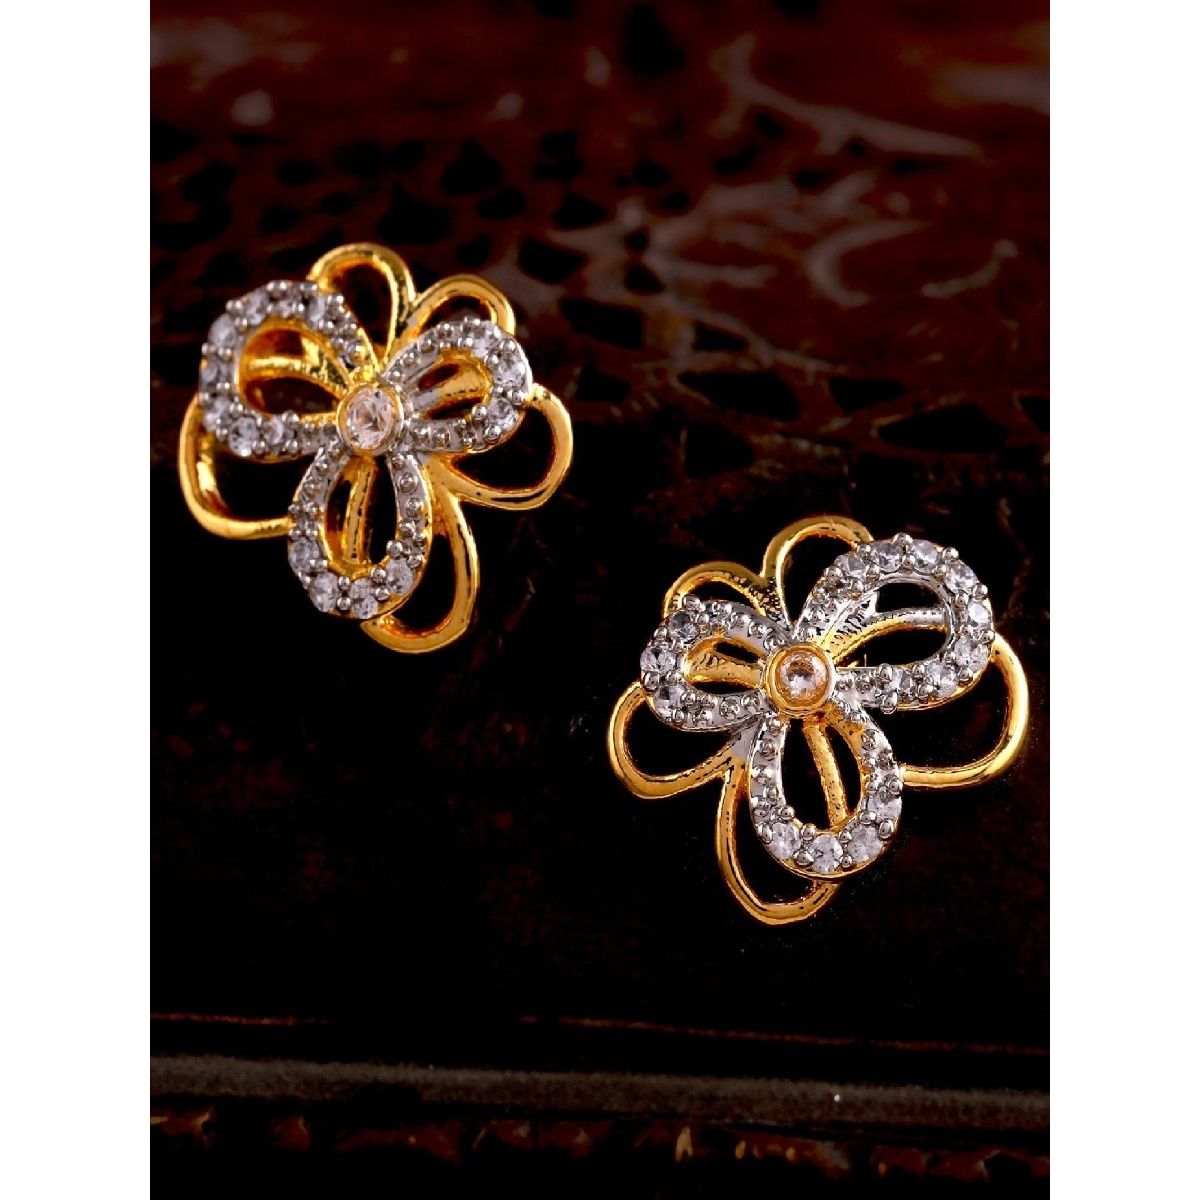 Buy SRC Artificial Diamond style Earrings Gold Plated Stud Tops Earrings  for Girls and Woman at Amazonin